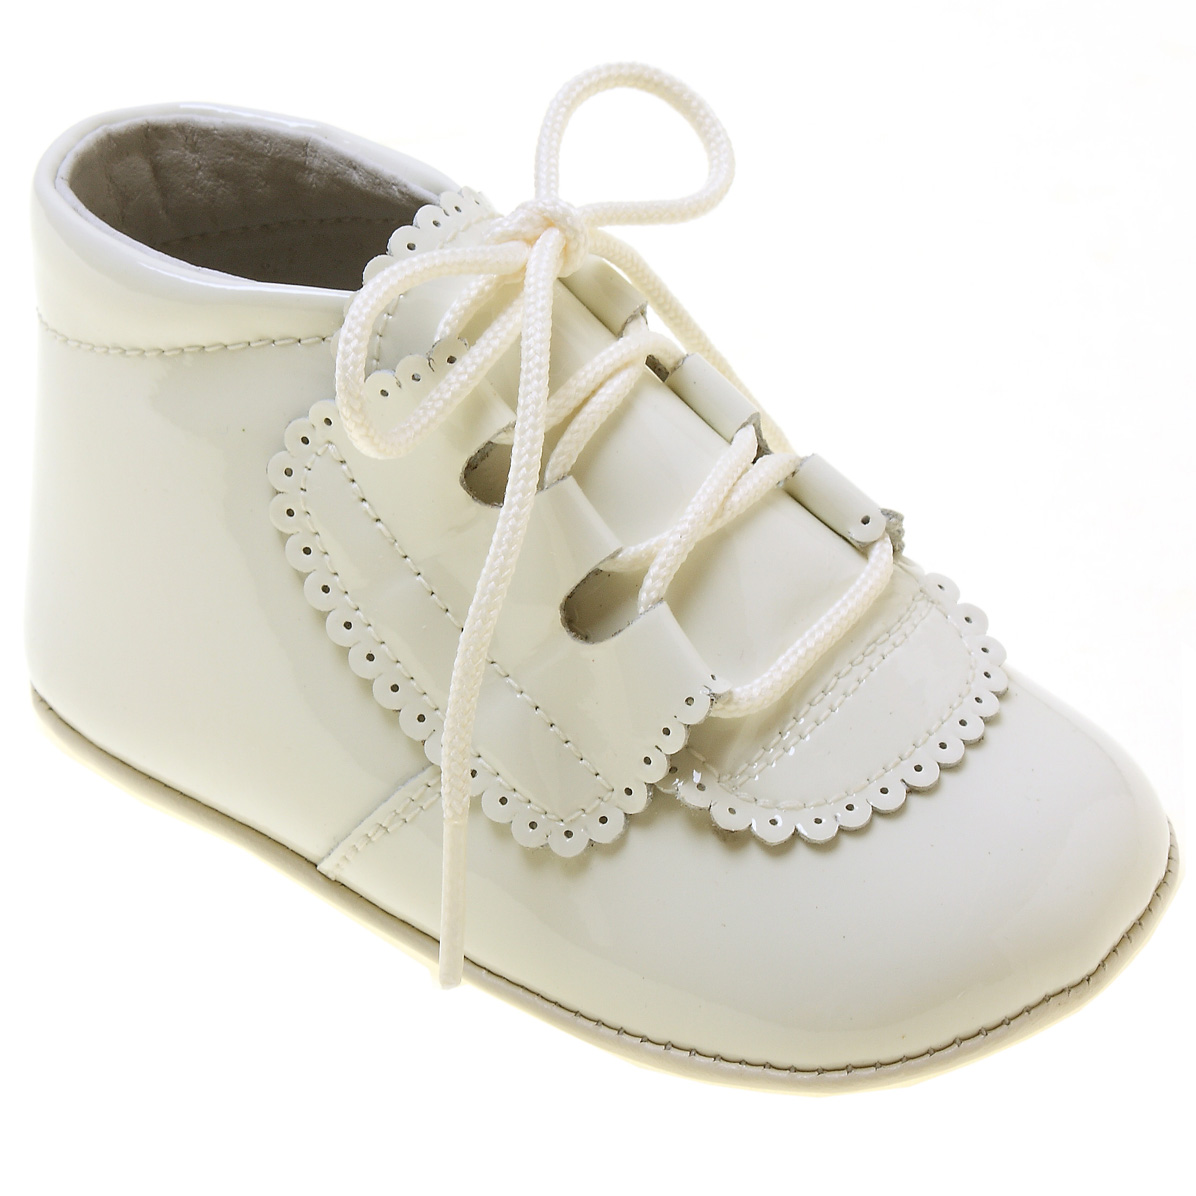 Baby Boys Ivory Shoes Patent Leather 